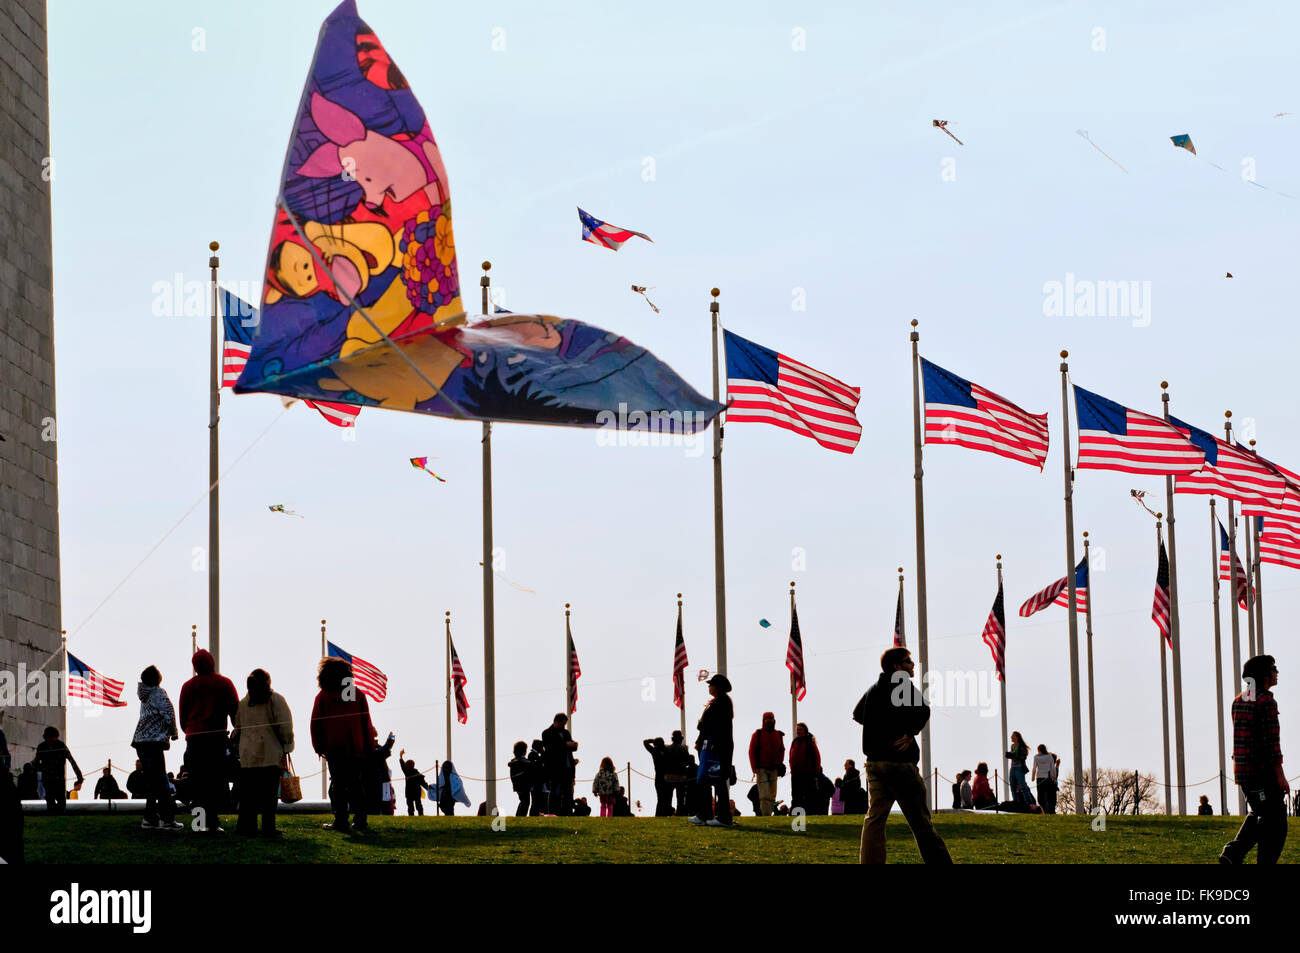 People flying kites on the Washington Monument grounds during the National Kite Festival. Stock Photo